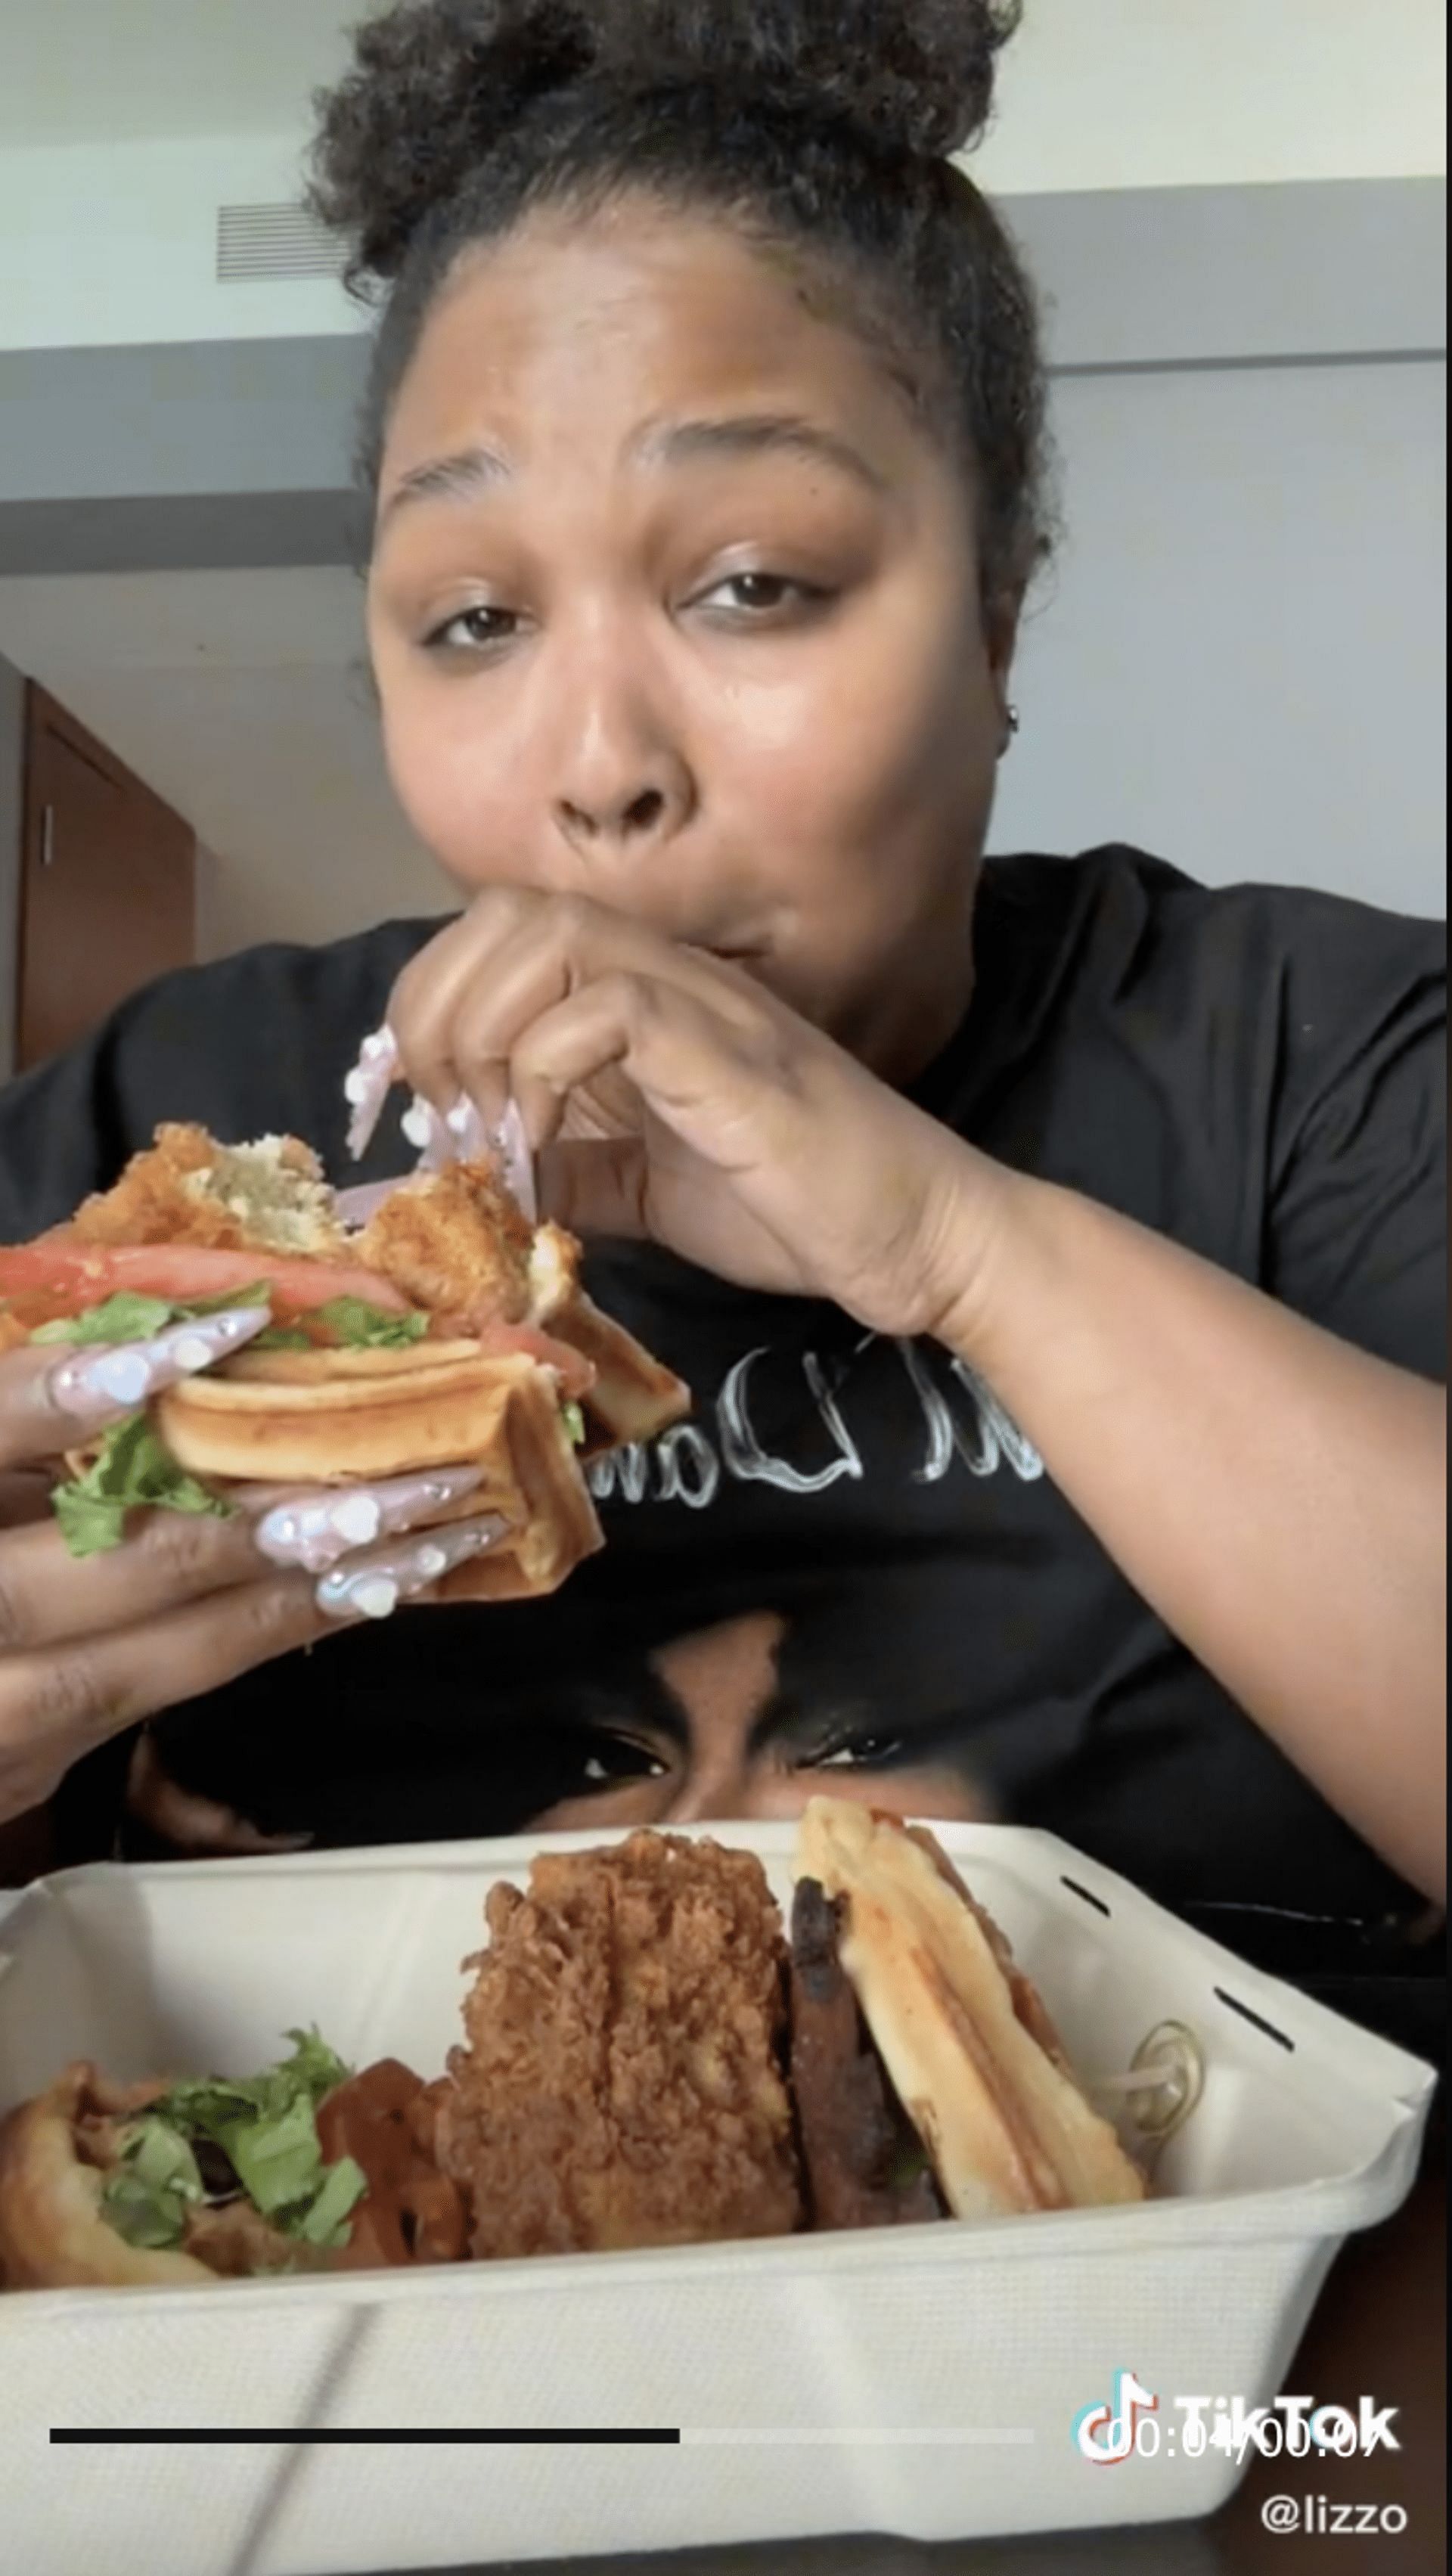 Lizzo used the Deli&#039;s audio, that garnered it more popularity for its chicken salad.